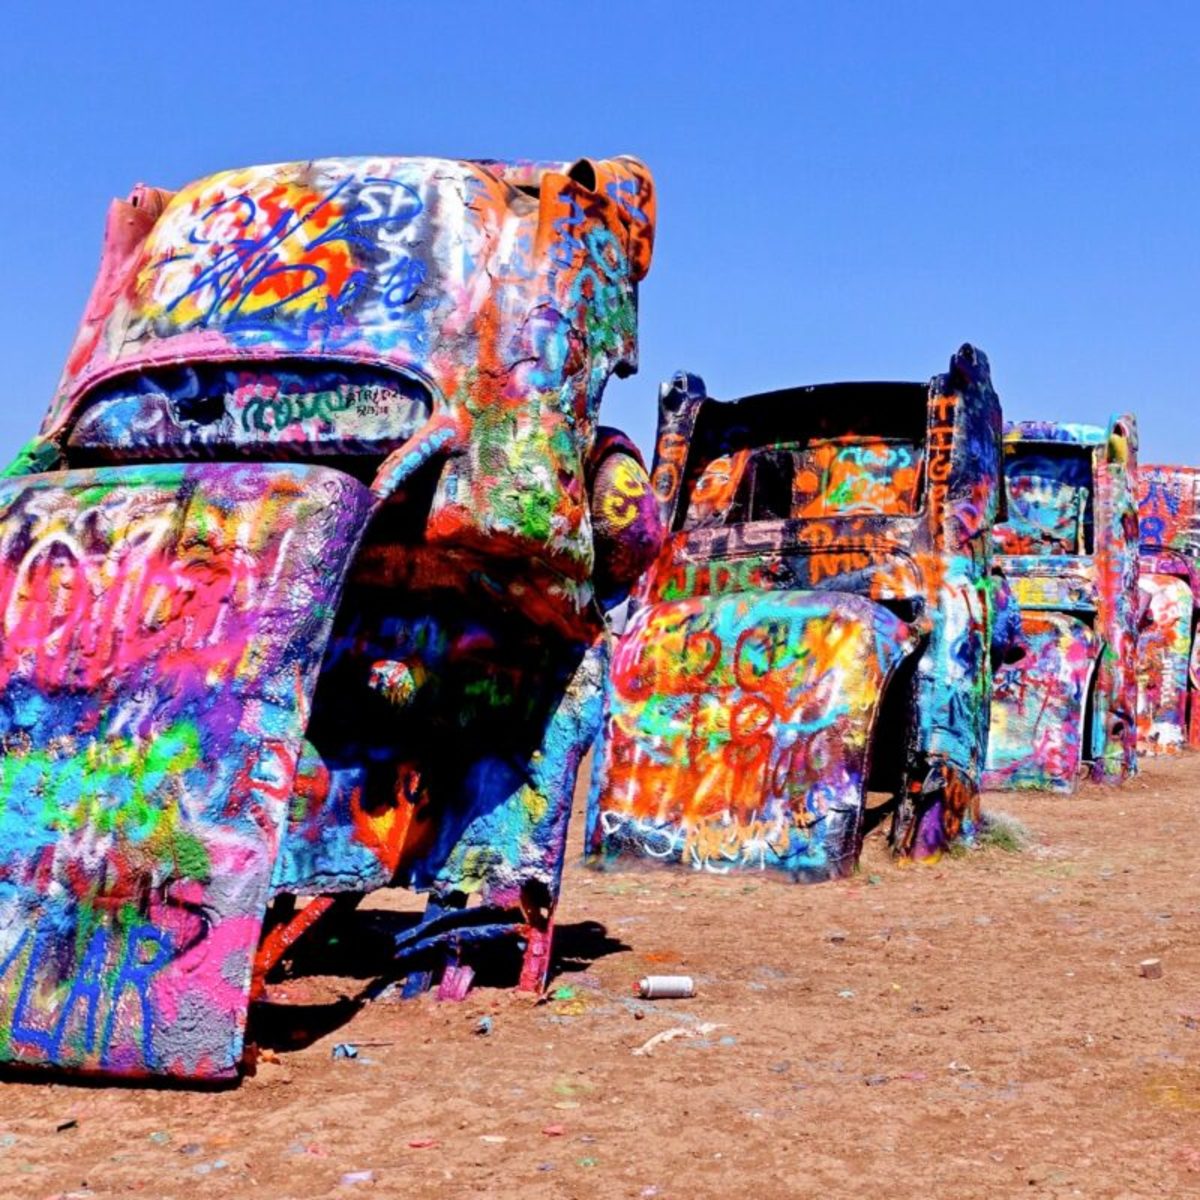 Cadillac Ranch was installed in 1974 with the various models showcasing the tailfins of these amazing cars!